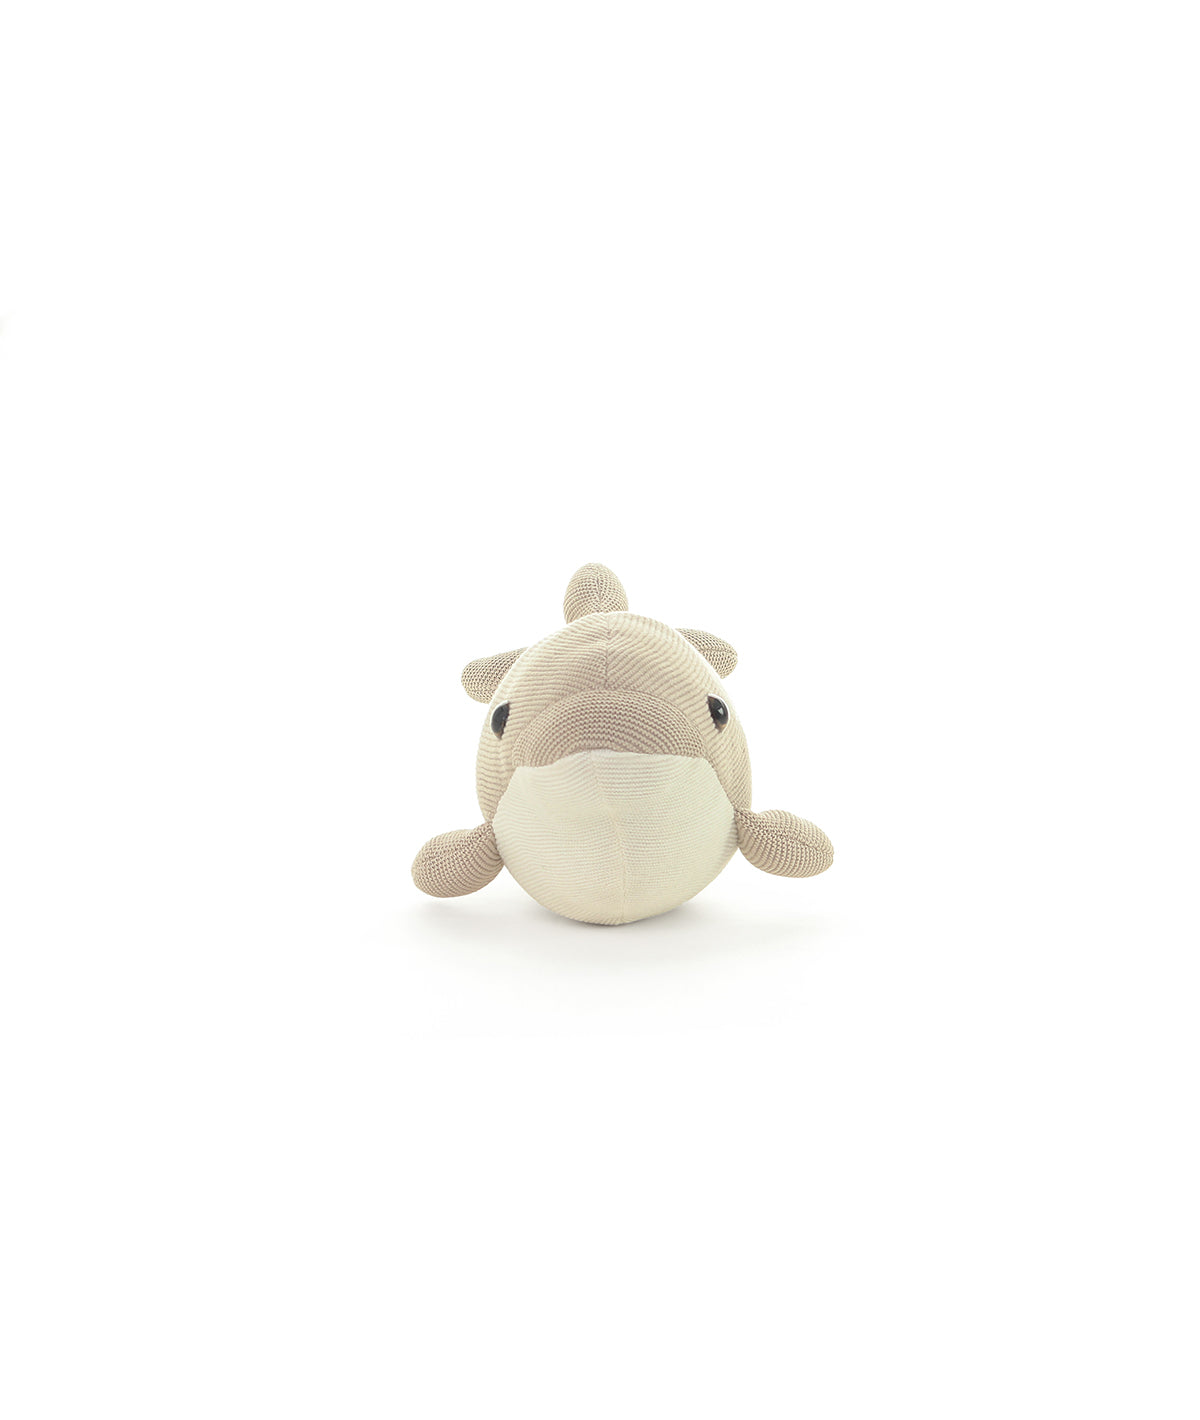 Fin Dolphin Cotton Knitted Stuffed Soft Toy (Pale Whisper & Ivory)